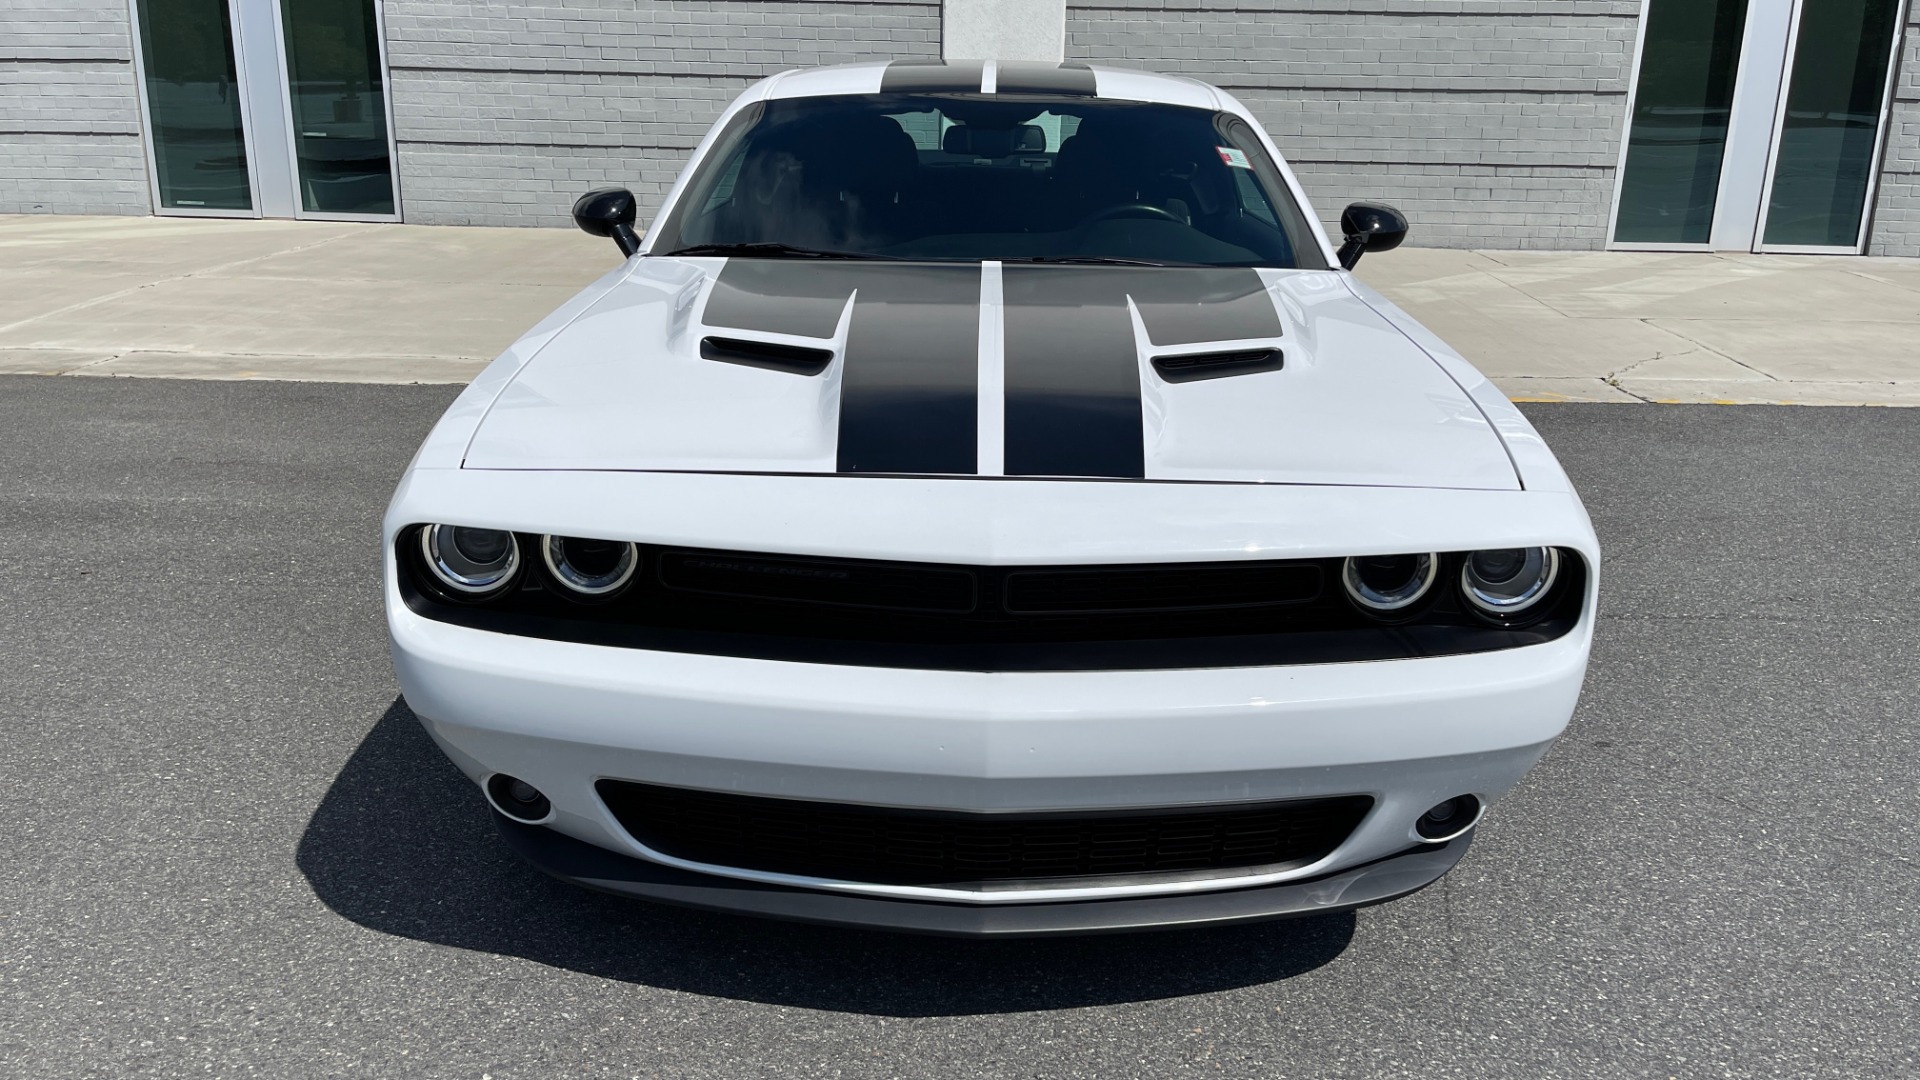 Used 2018 Dodge CHALLENGER SXT COUPE / BLACKTOP PKG / 3.6L V6 / 8-SPD AUTO / REARVIEW for sale Sold at Formula Imports in Charlotte NC 28227 12